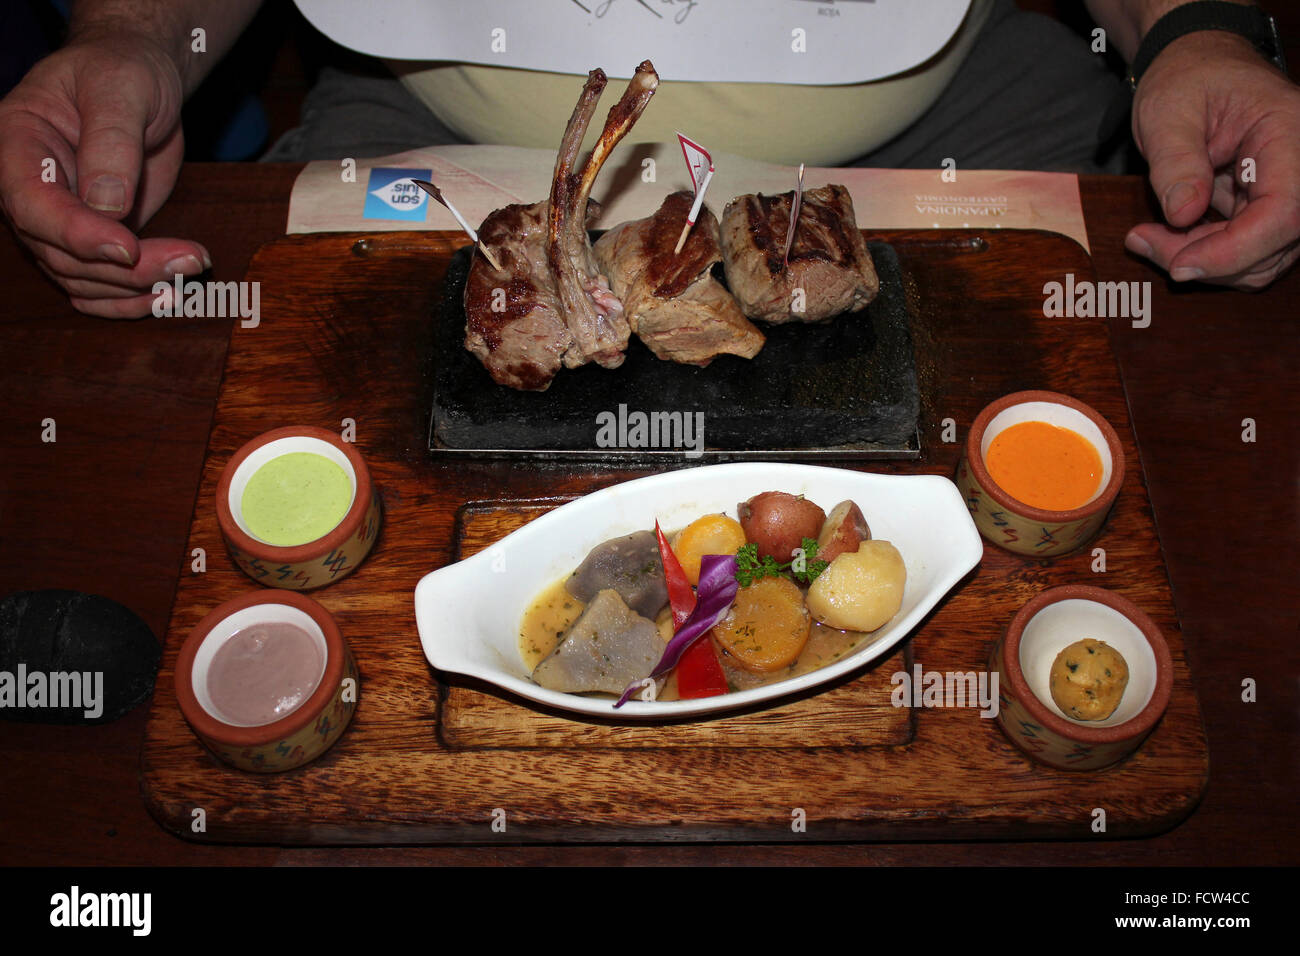 Traditional Three Meats Dish Served In A Restaurant In Arequipa, Peru Stock Photo